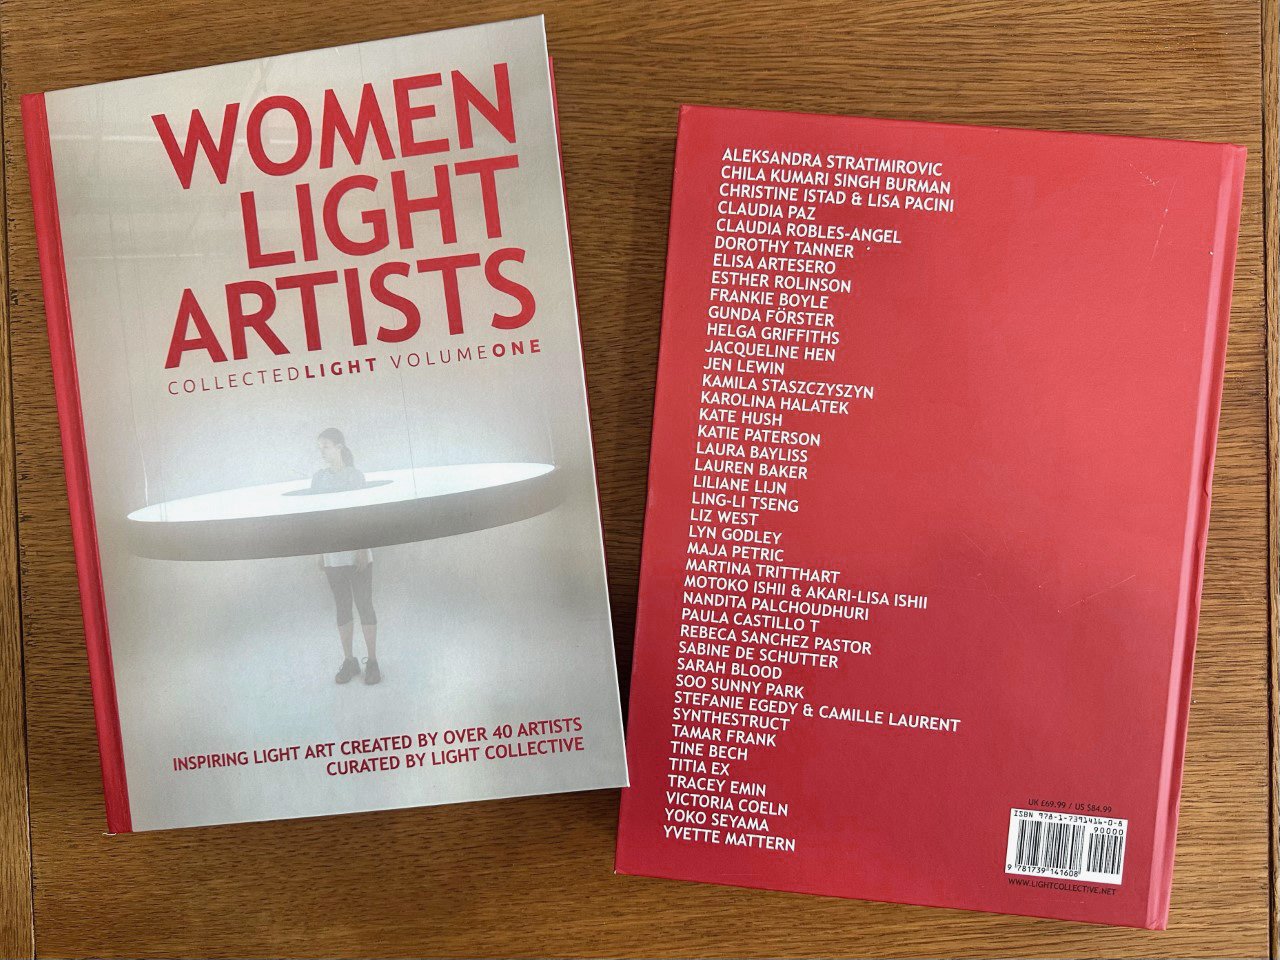 Front and back cover of the publication, Women Light Artists.